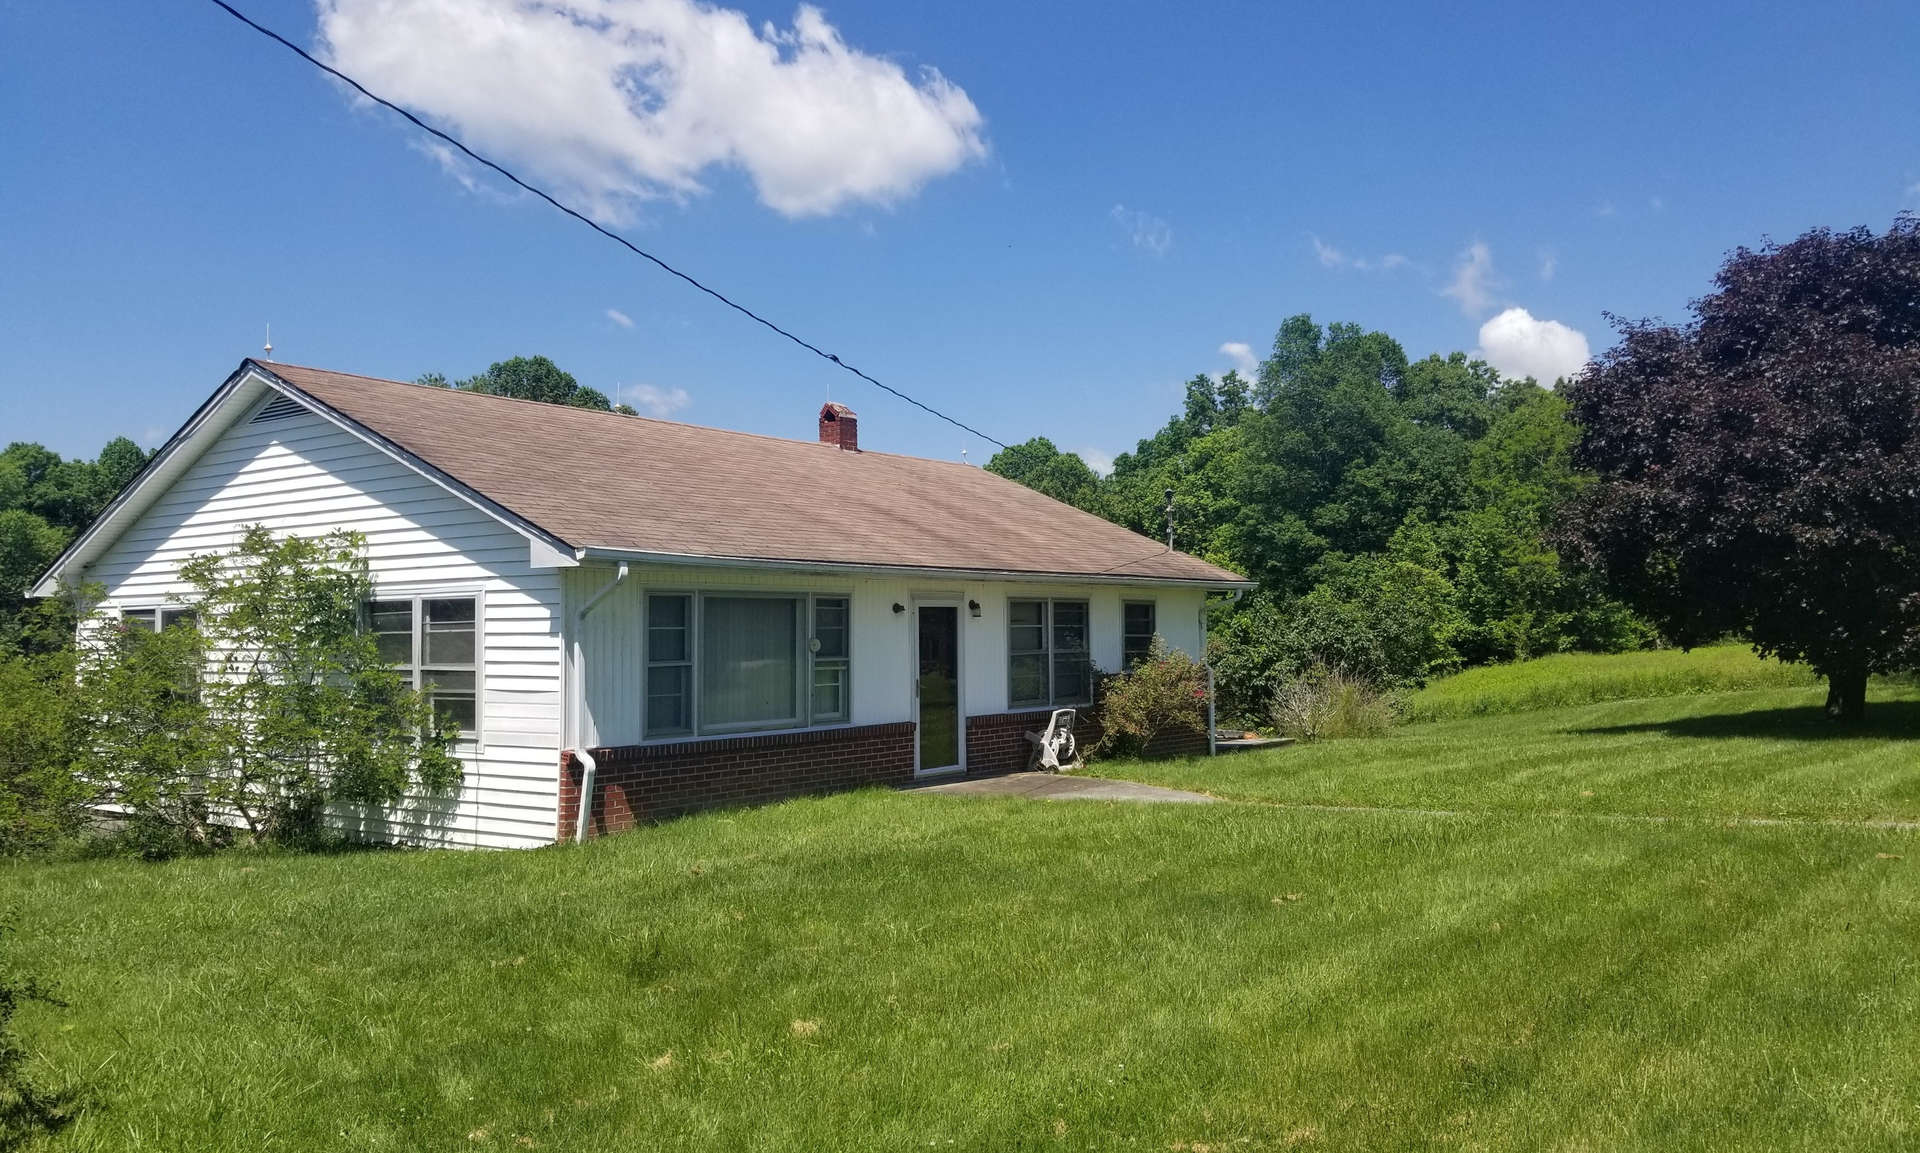 Affordable mini farm for first time home buyers located on 15 acres in the Flatridge area of Grayson County. This classic country cottage offering 3 bedrooms and 1-bath features a level front yard and easy access from a paved state maintained road.